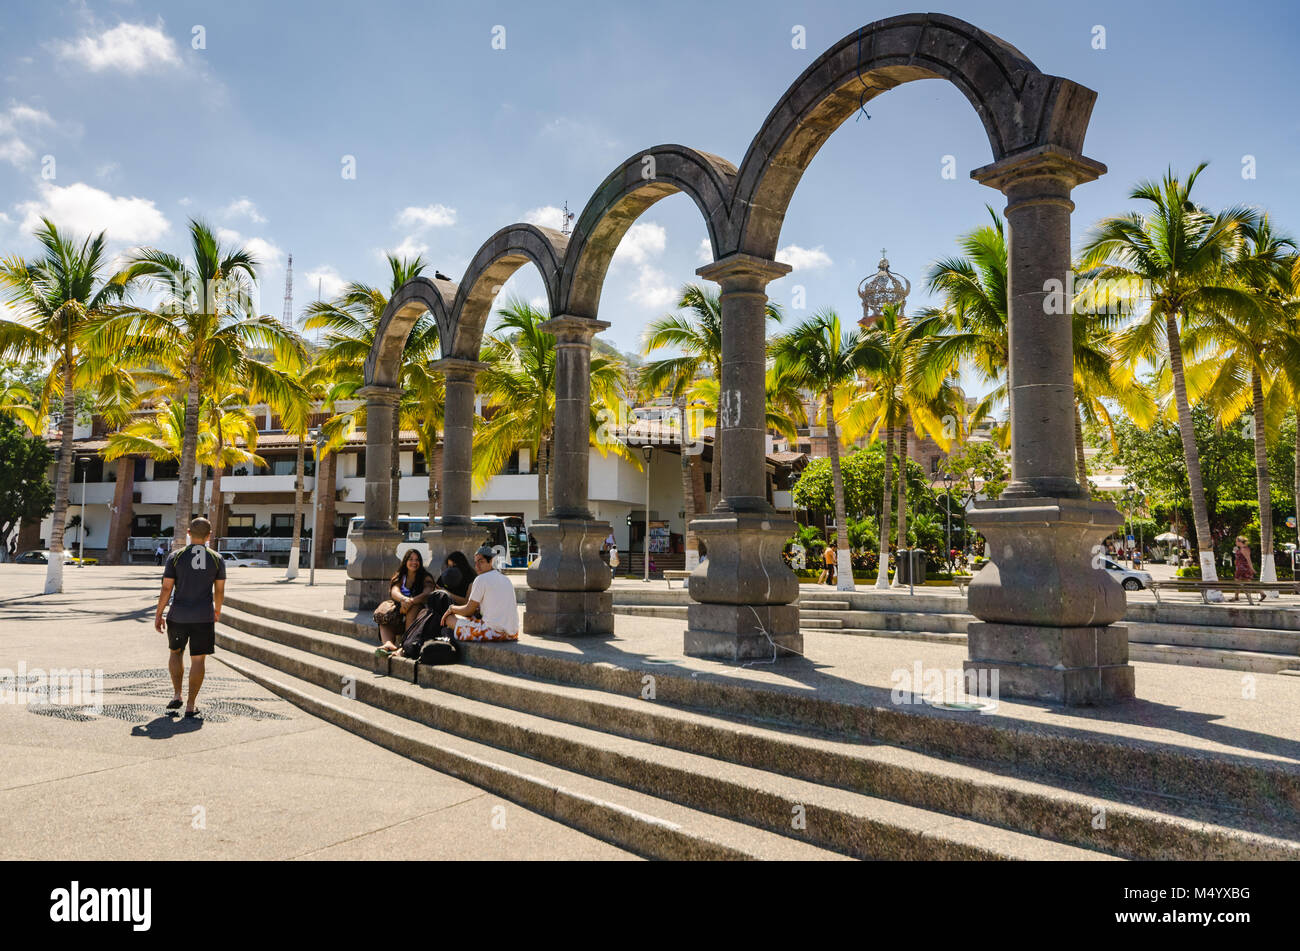 The Arcos del Malecón (Malecon Arches) sculpture, an icon of the city, was originally brought from a colonial hacienda in Guadalajara. Stock Photo